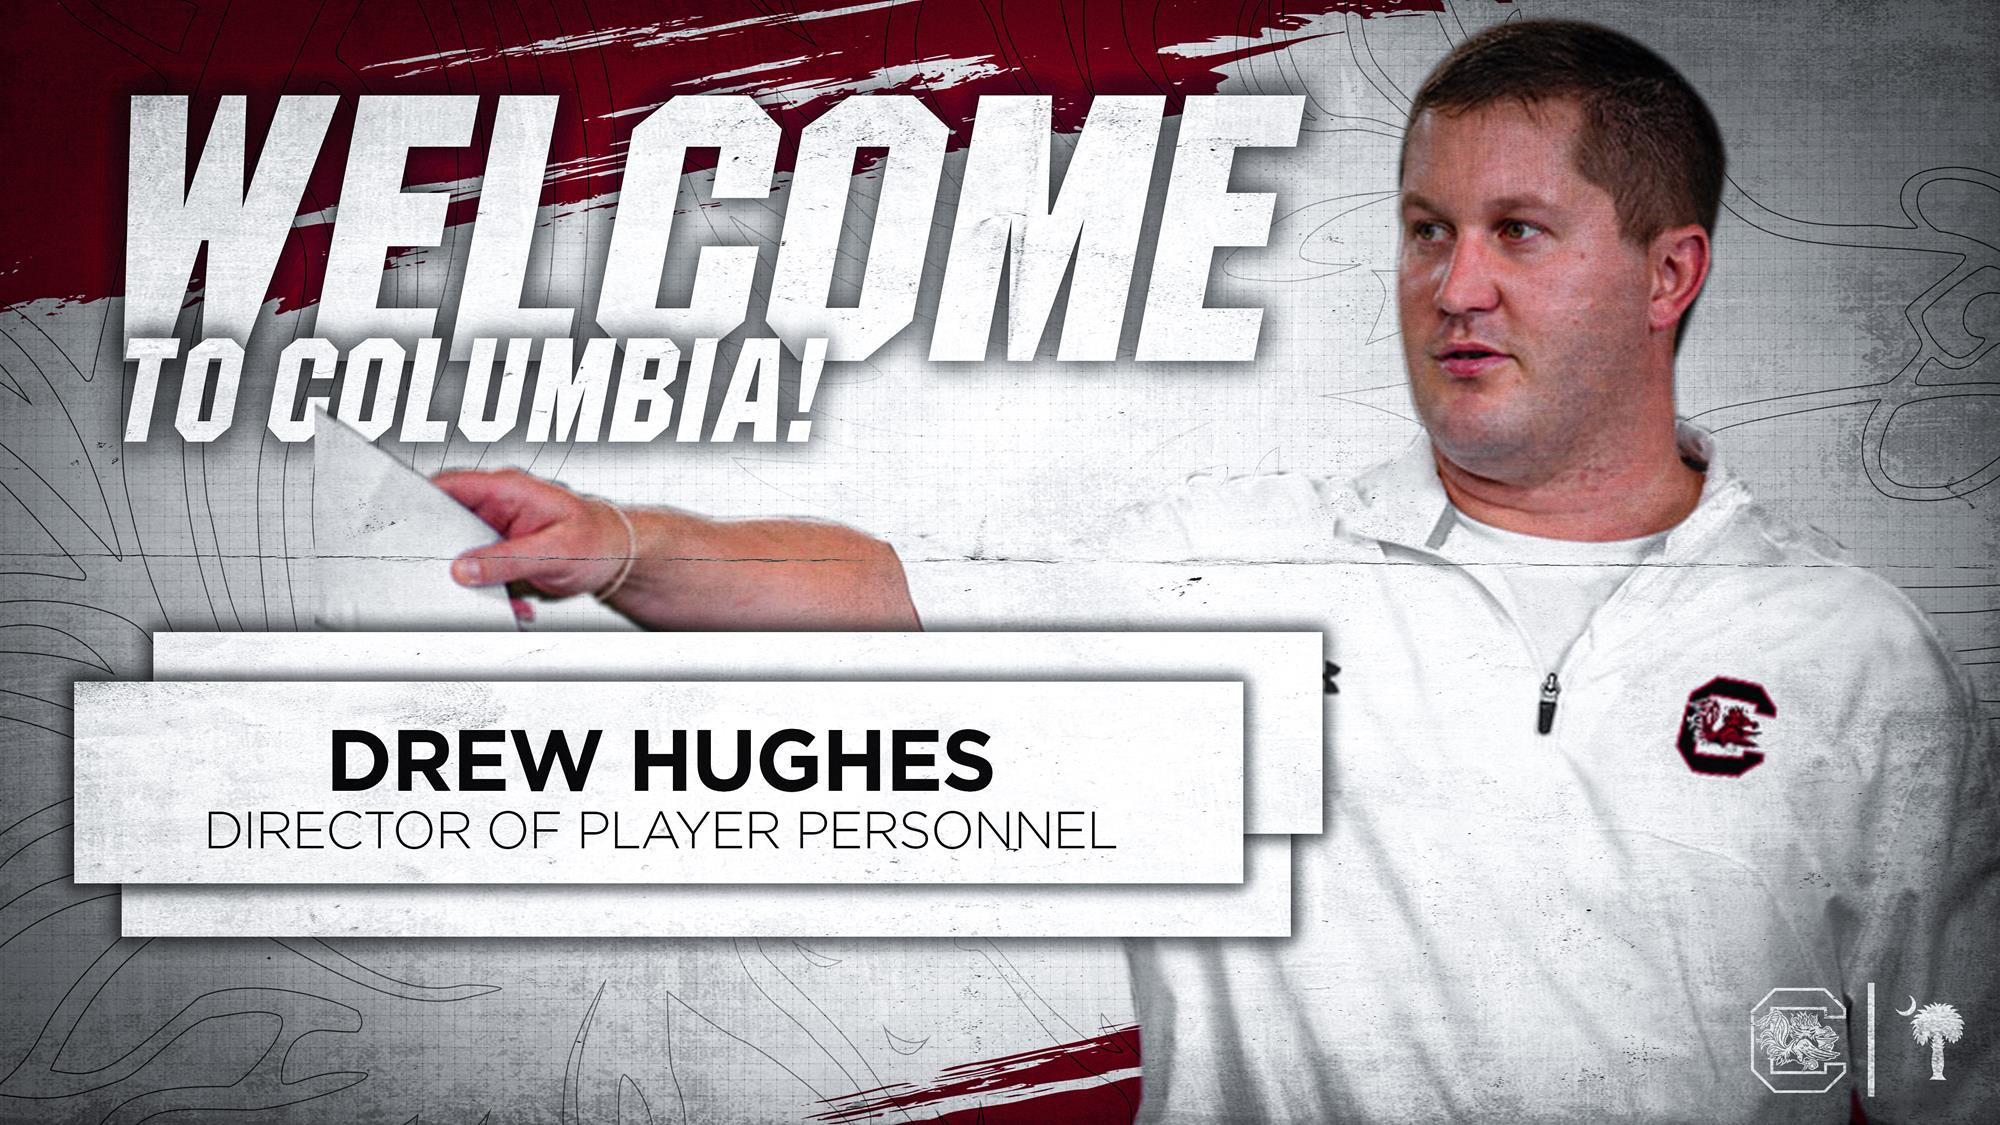 Drew Hughes Named Director of Player Personnel